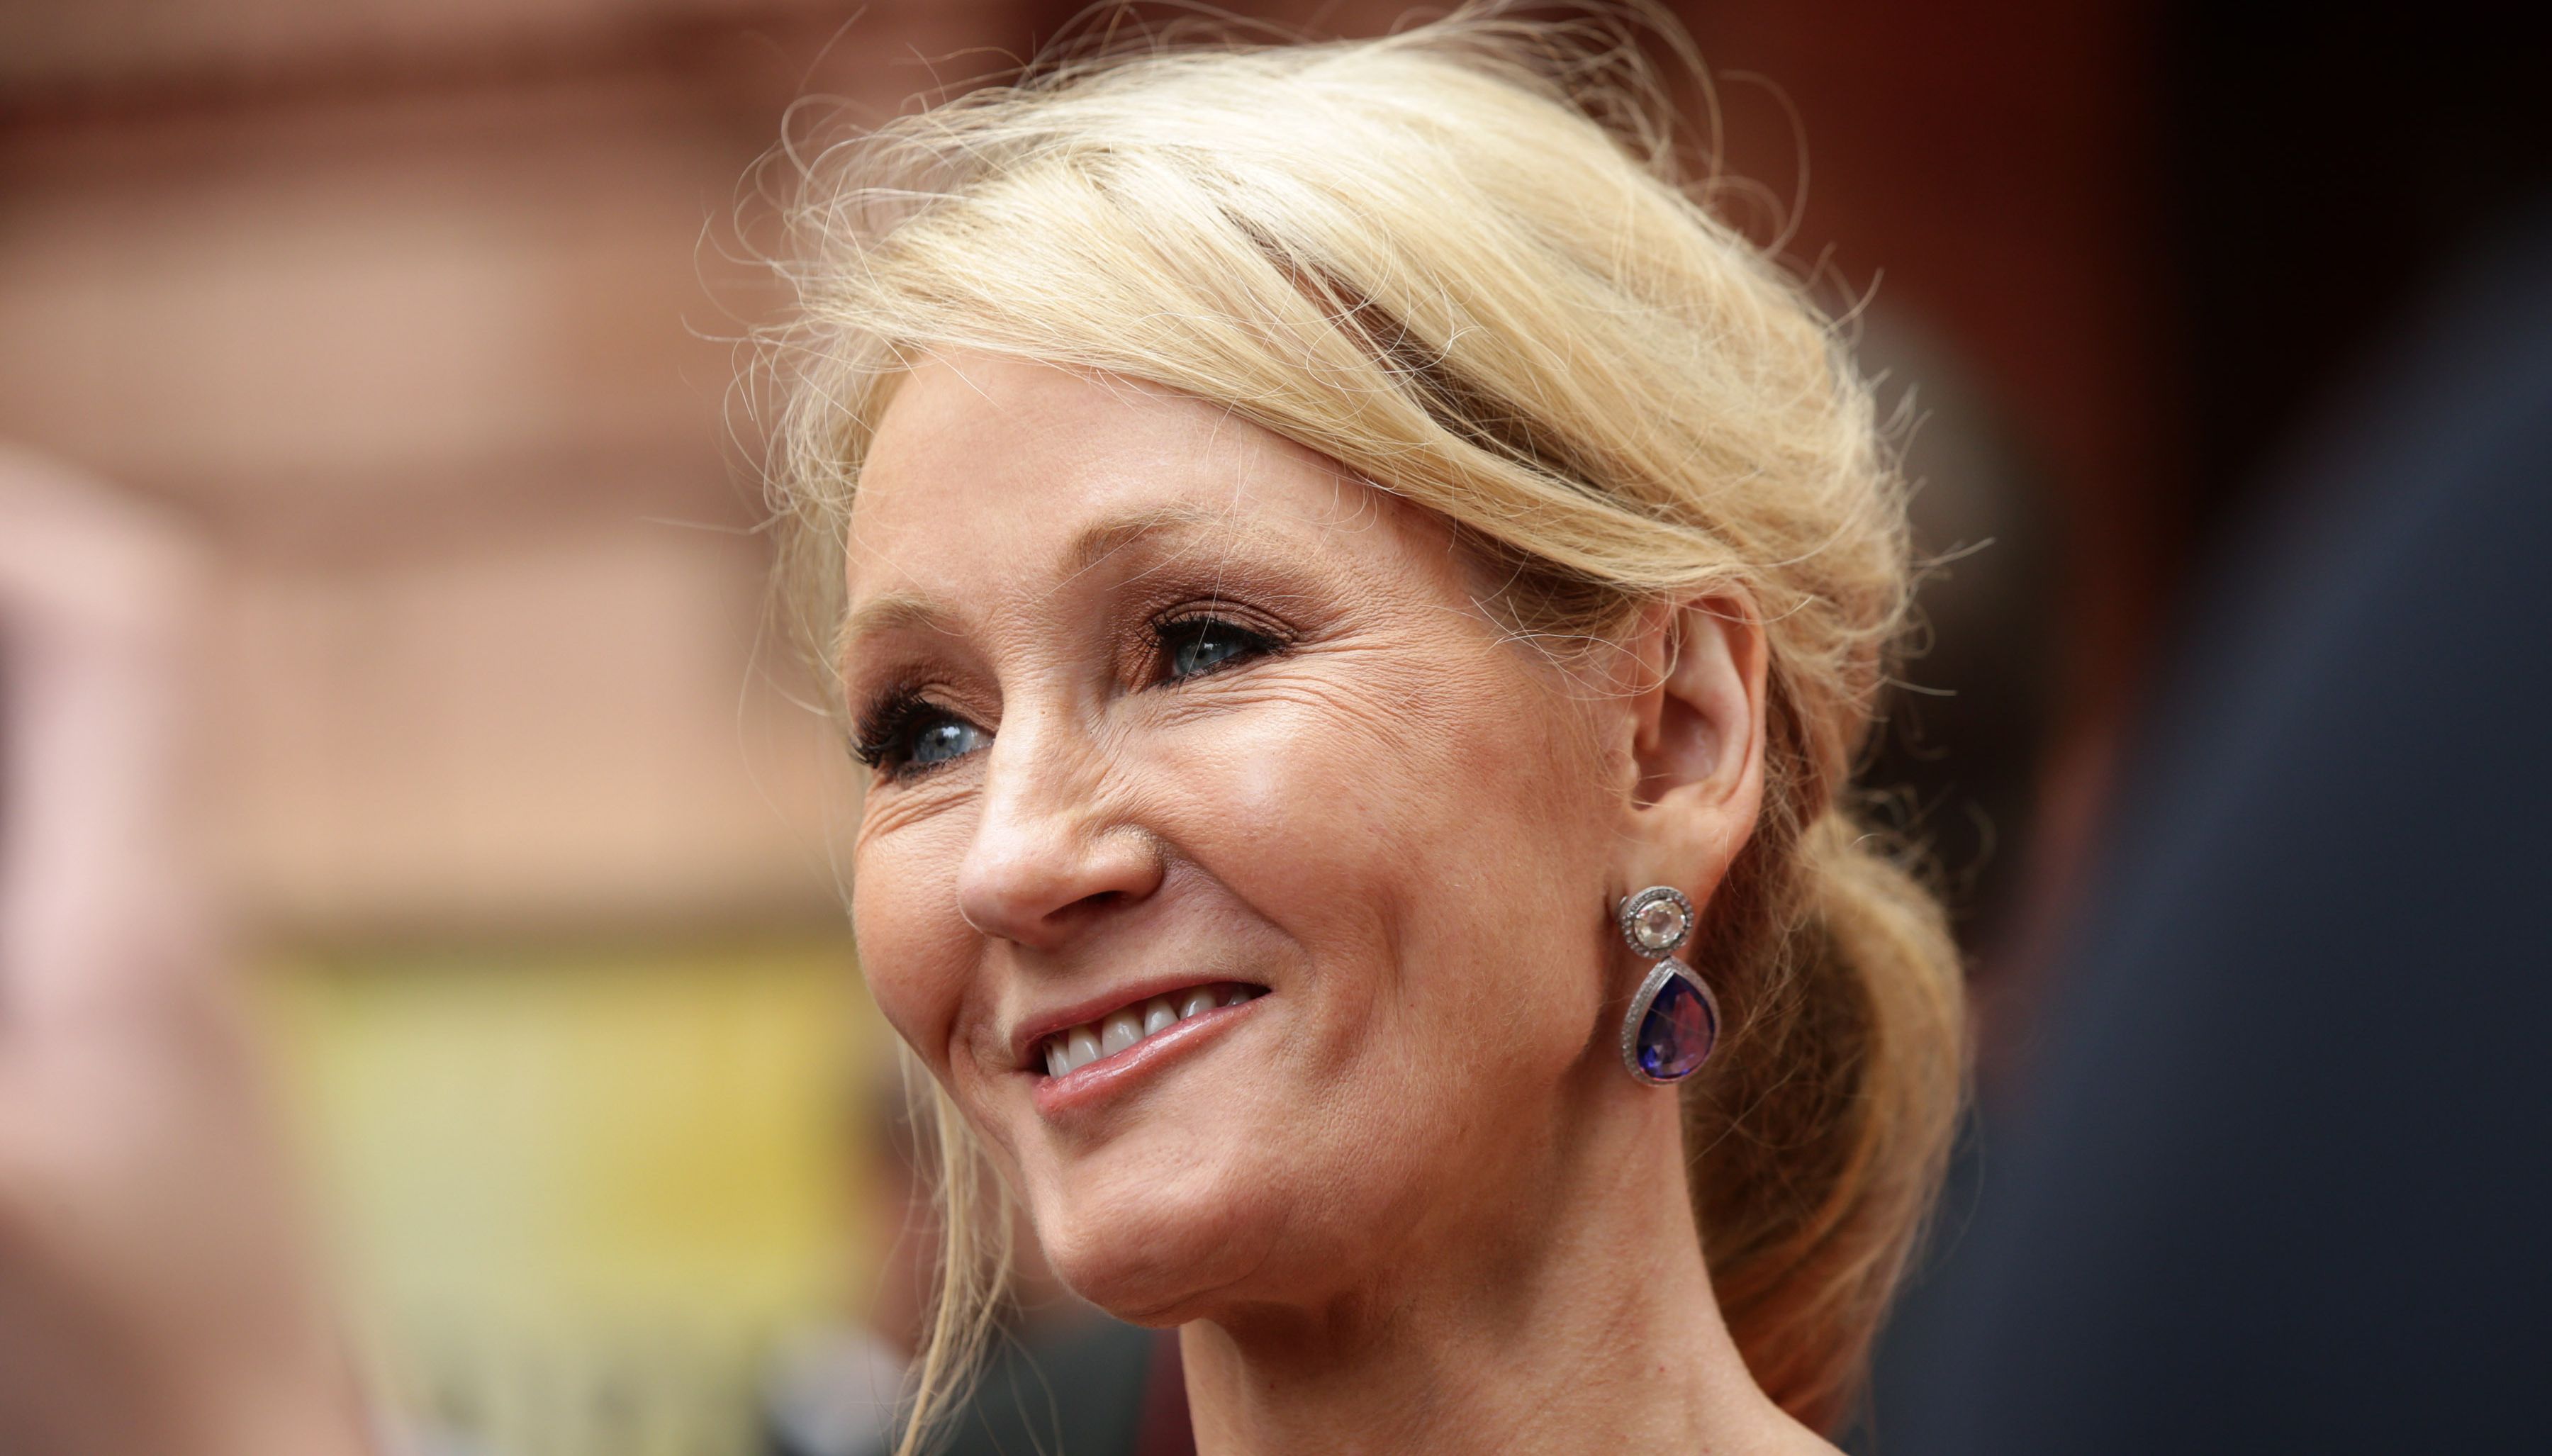 JK Rowling arriving for the opening gala performance of Harry Potter and The Cursed Child, at the Palace Theatre in London.